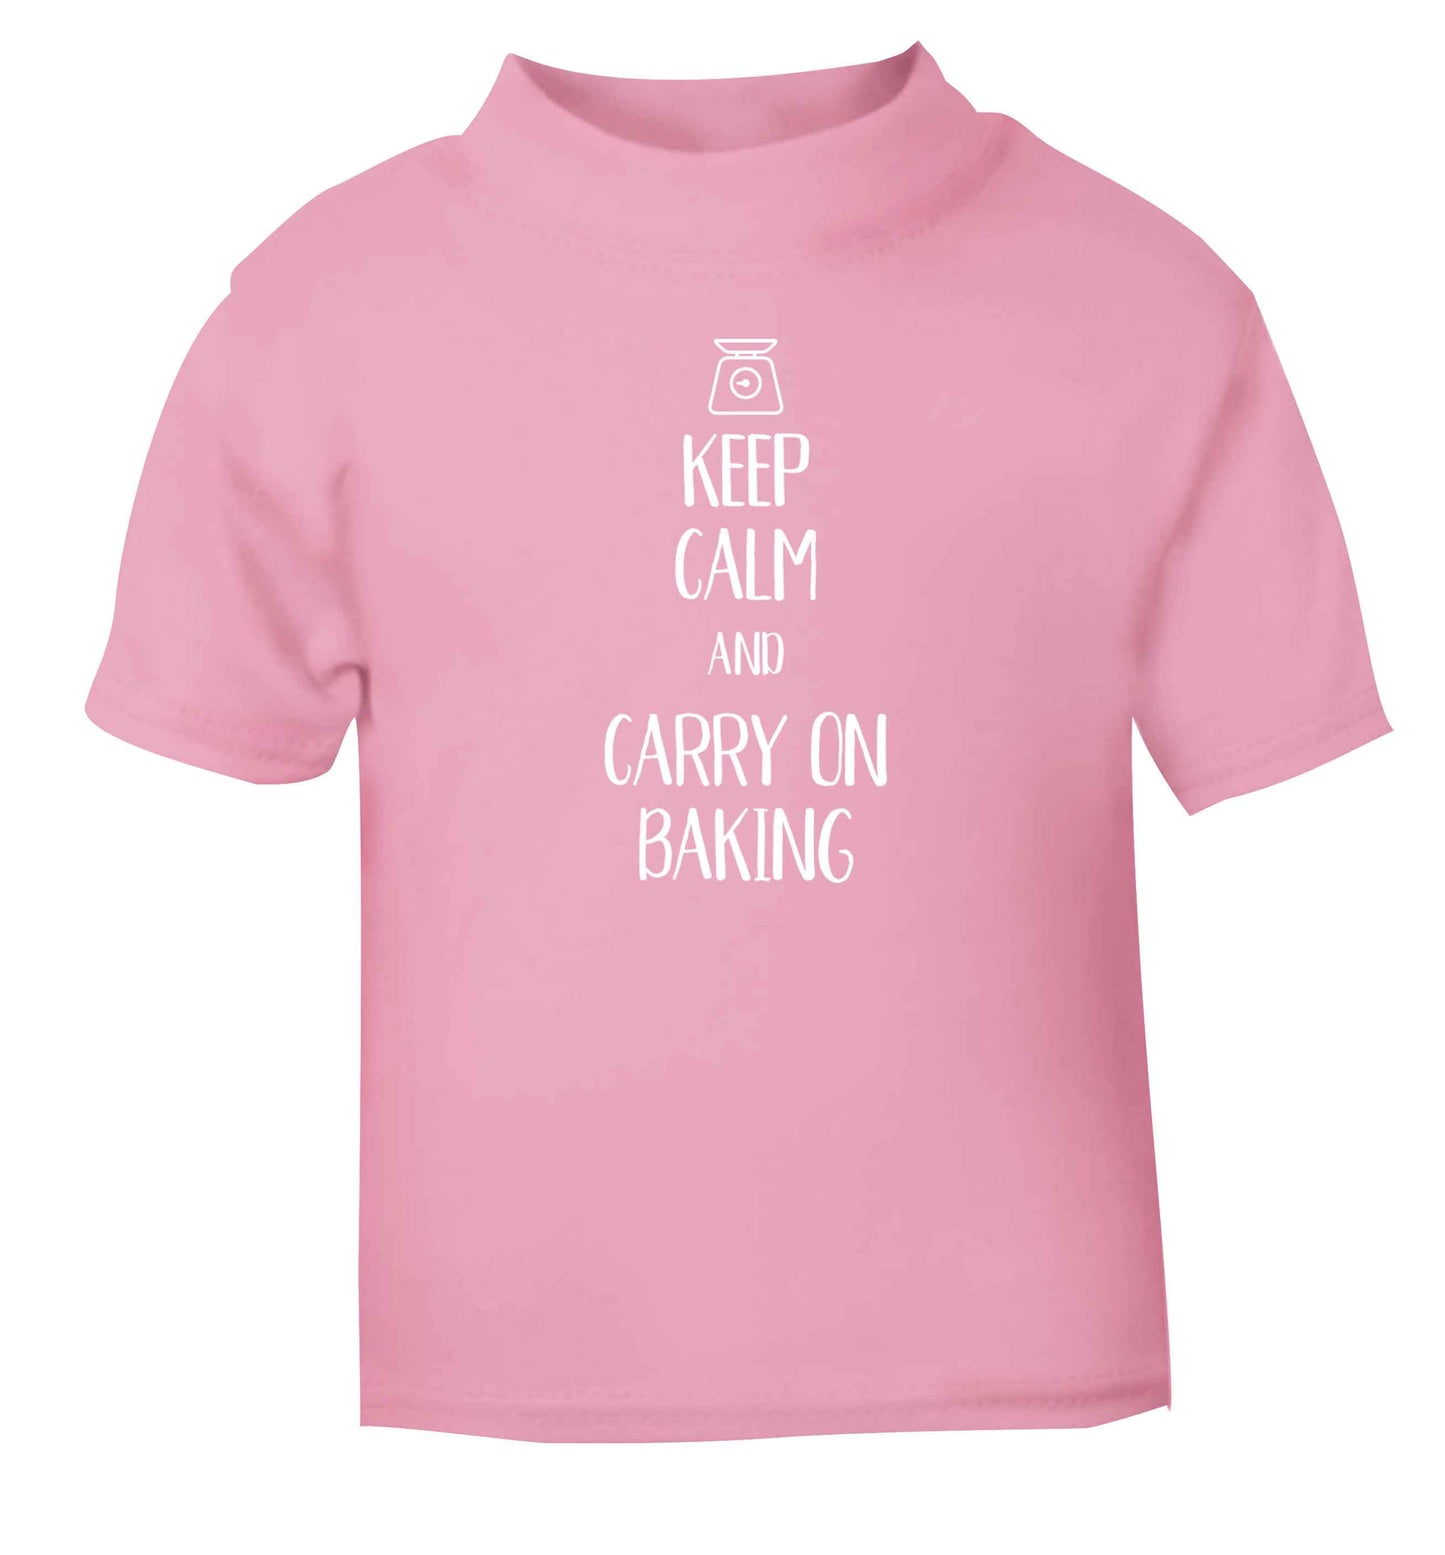 Keep calm and carry on baking light pink Baby Toddler Tshirt 2 Years